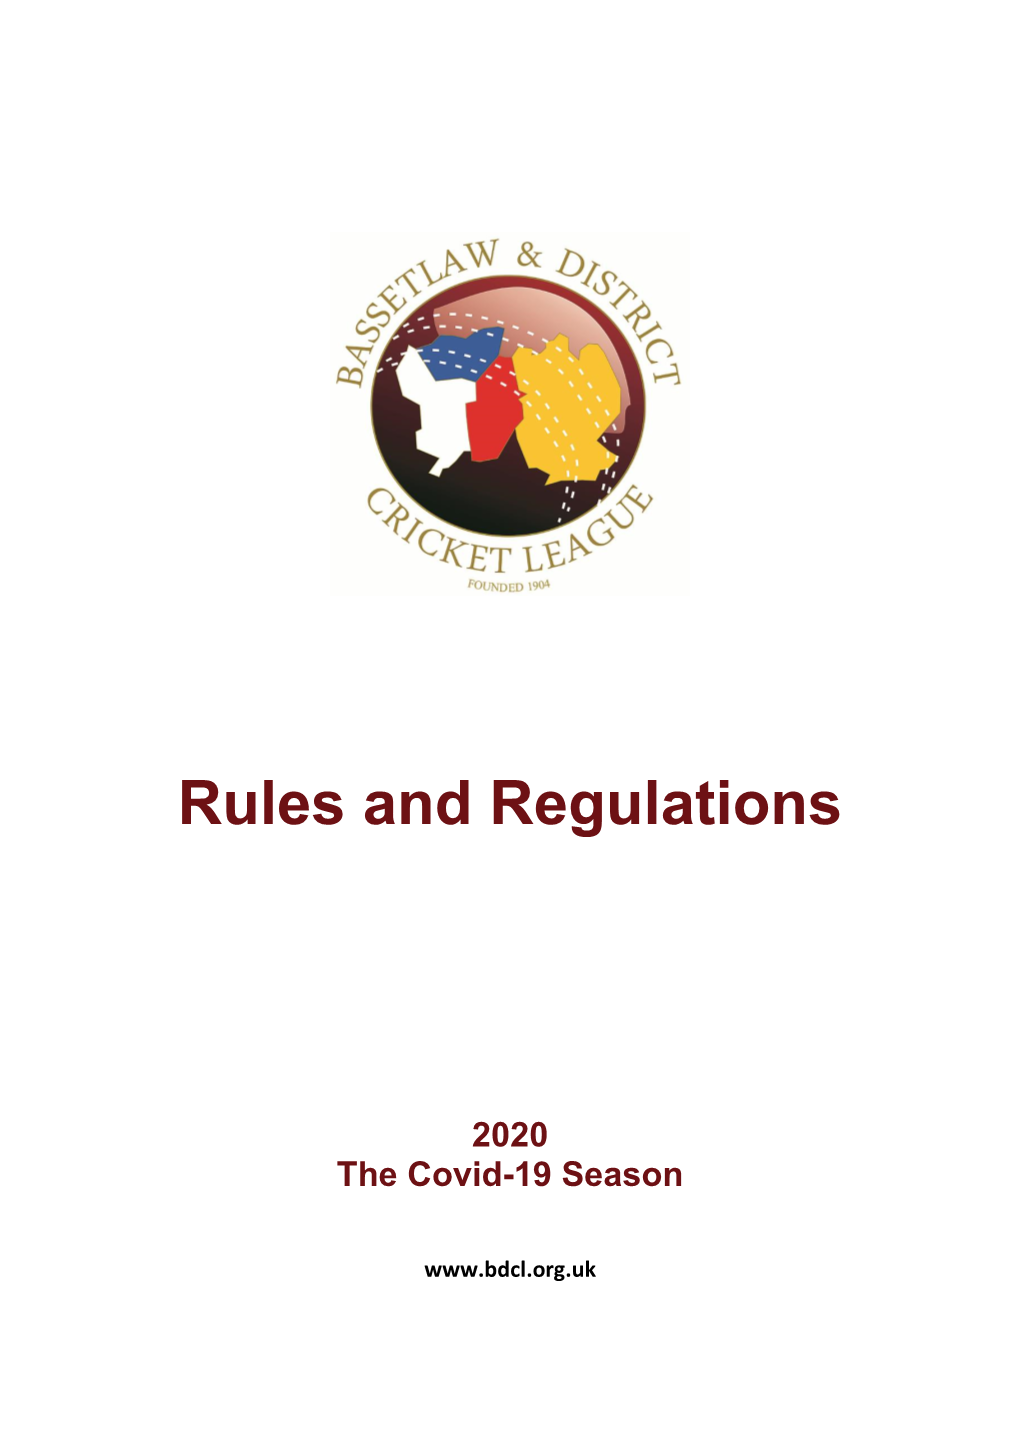 The Bassetlaw & District Cricket League Rules and Regulations